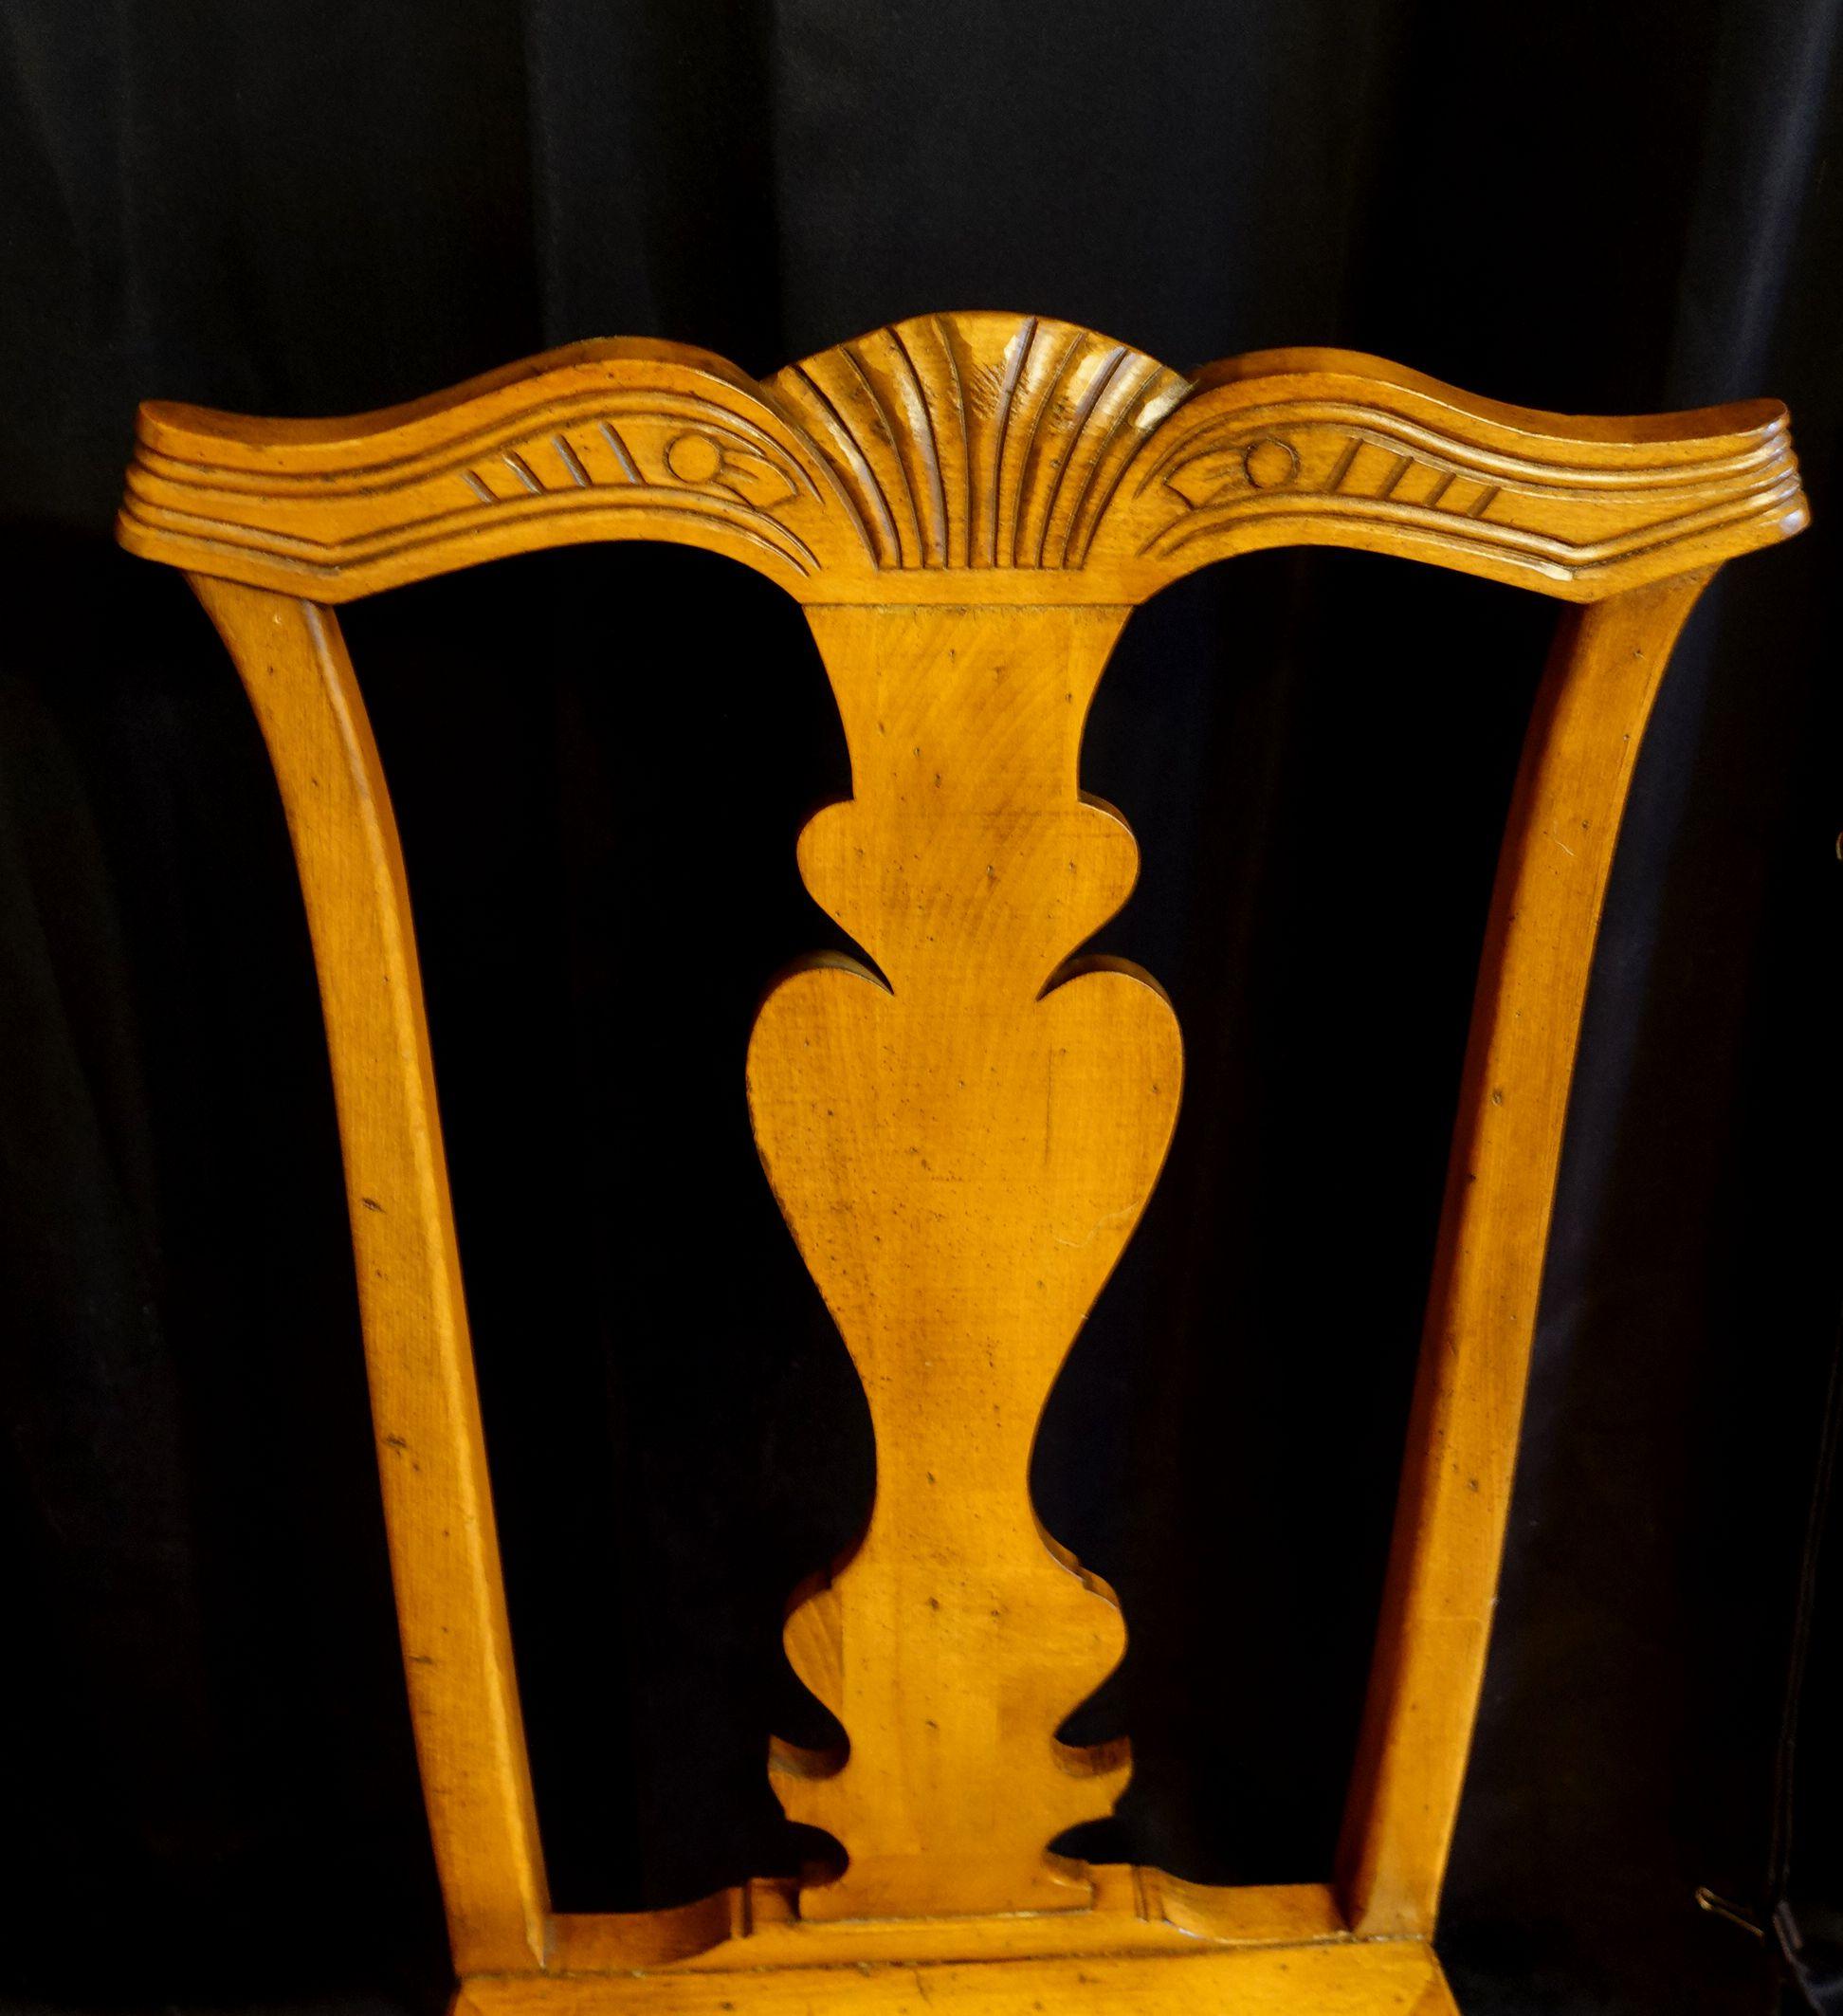 Hand-Carved 18th Century Queen Anne Period Walnut Single Chair with Caned Seat